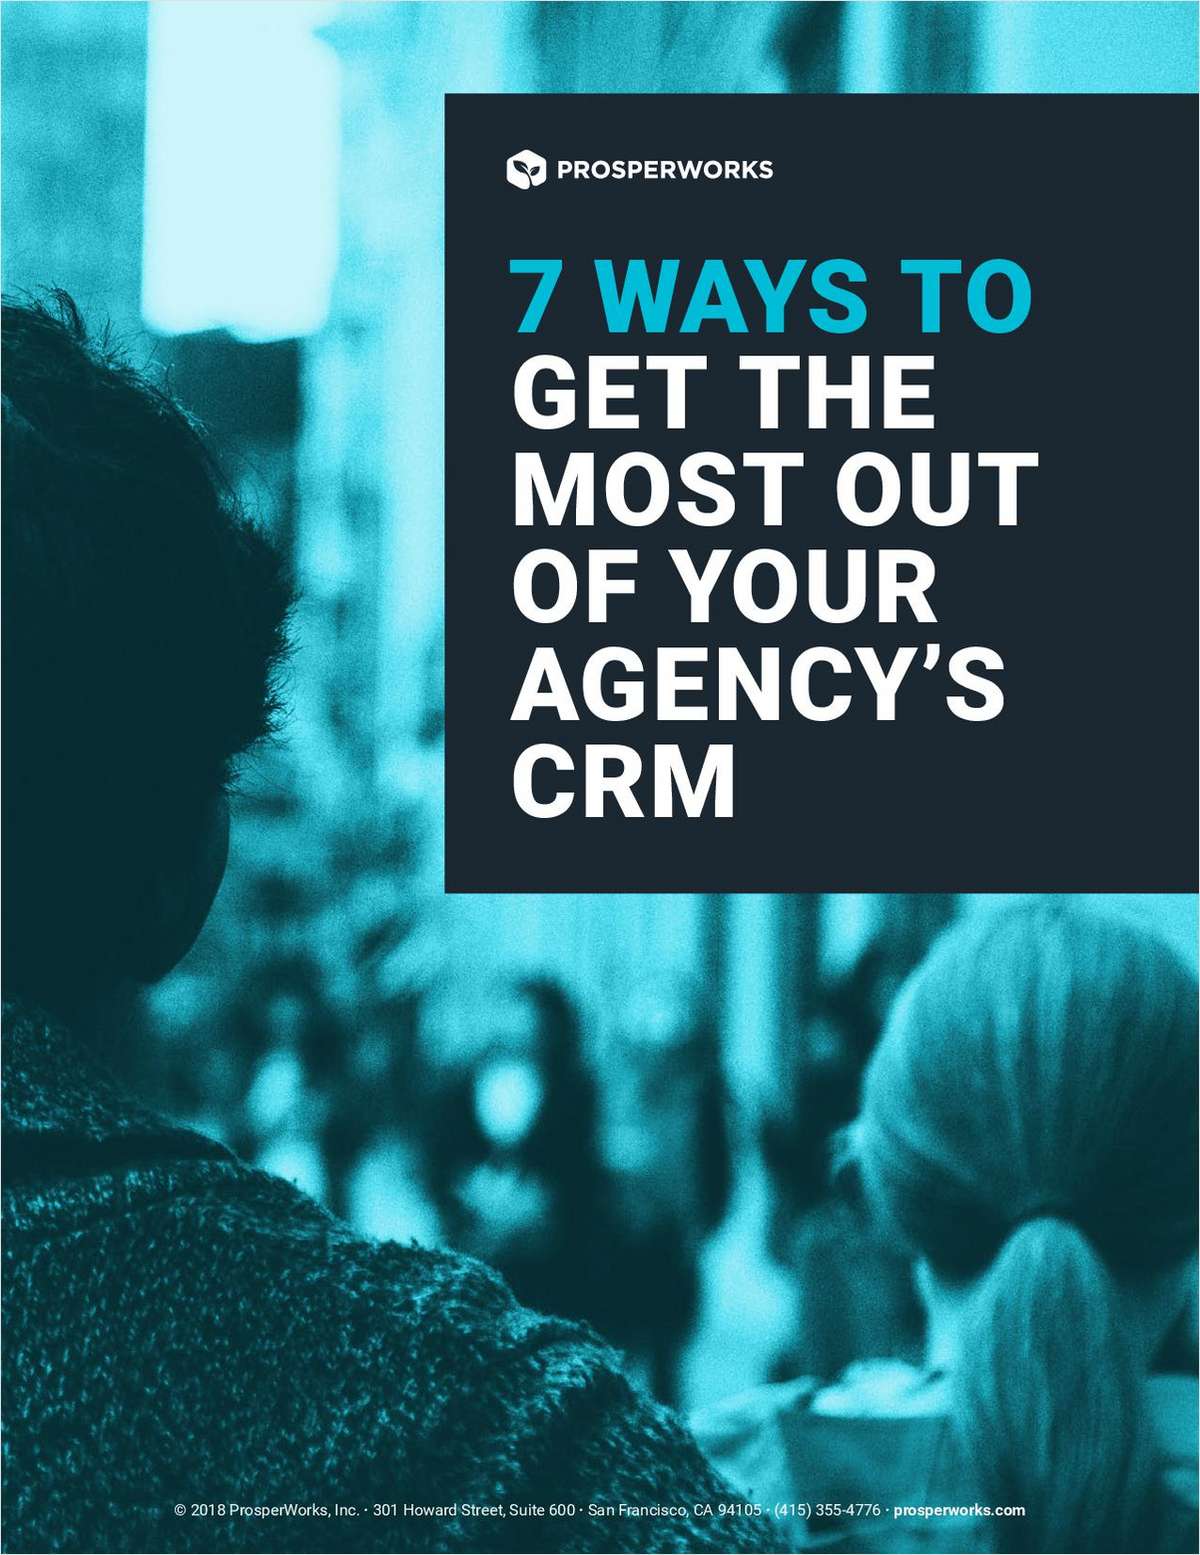 7 Ways to Get the Most Out of Your Agency's CRM